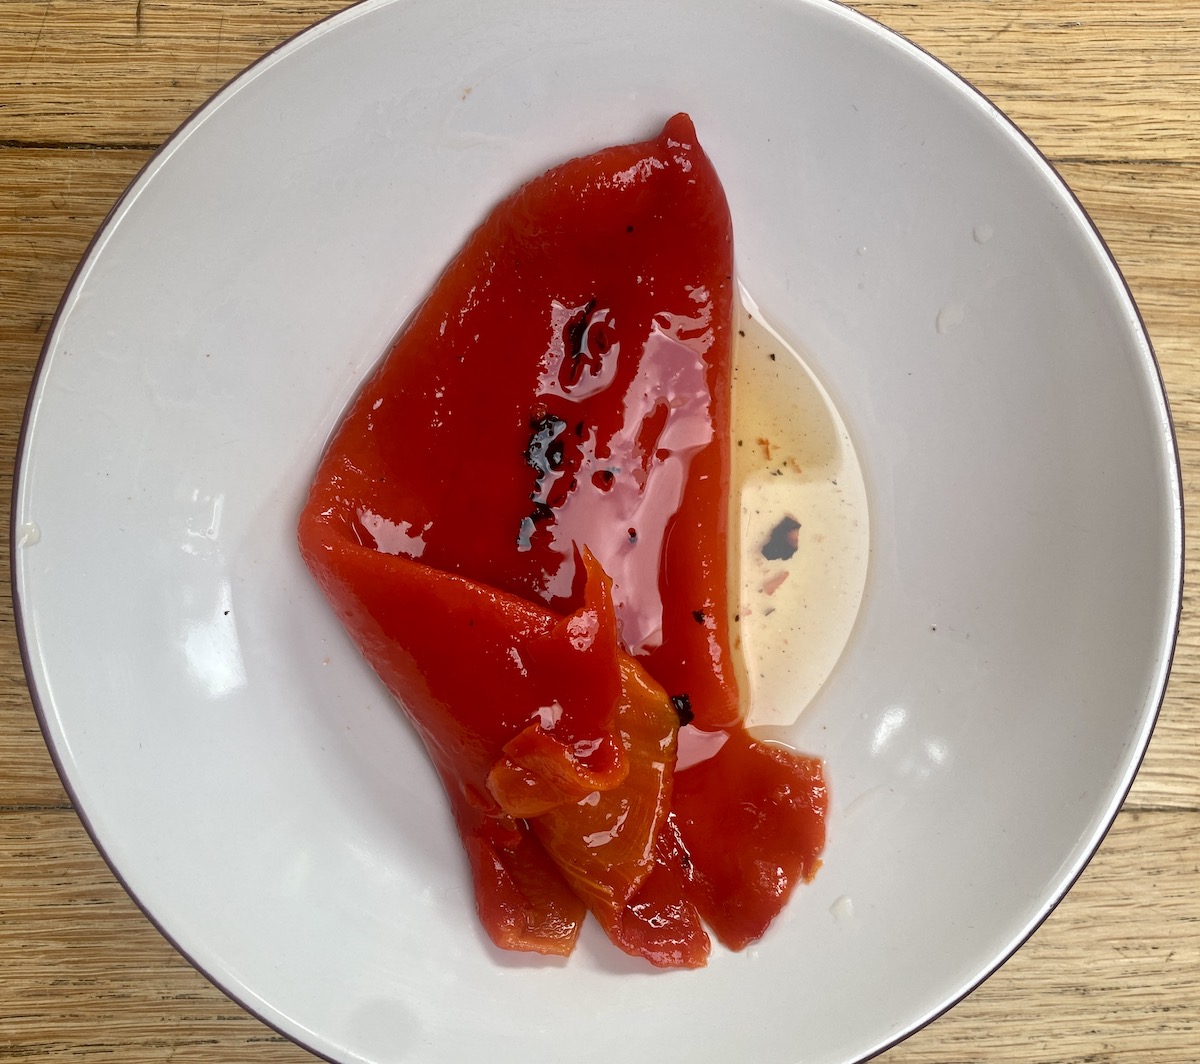 a roasted red pepper from a jar in a white bowl.